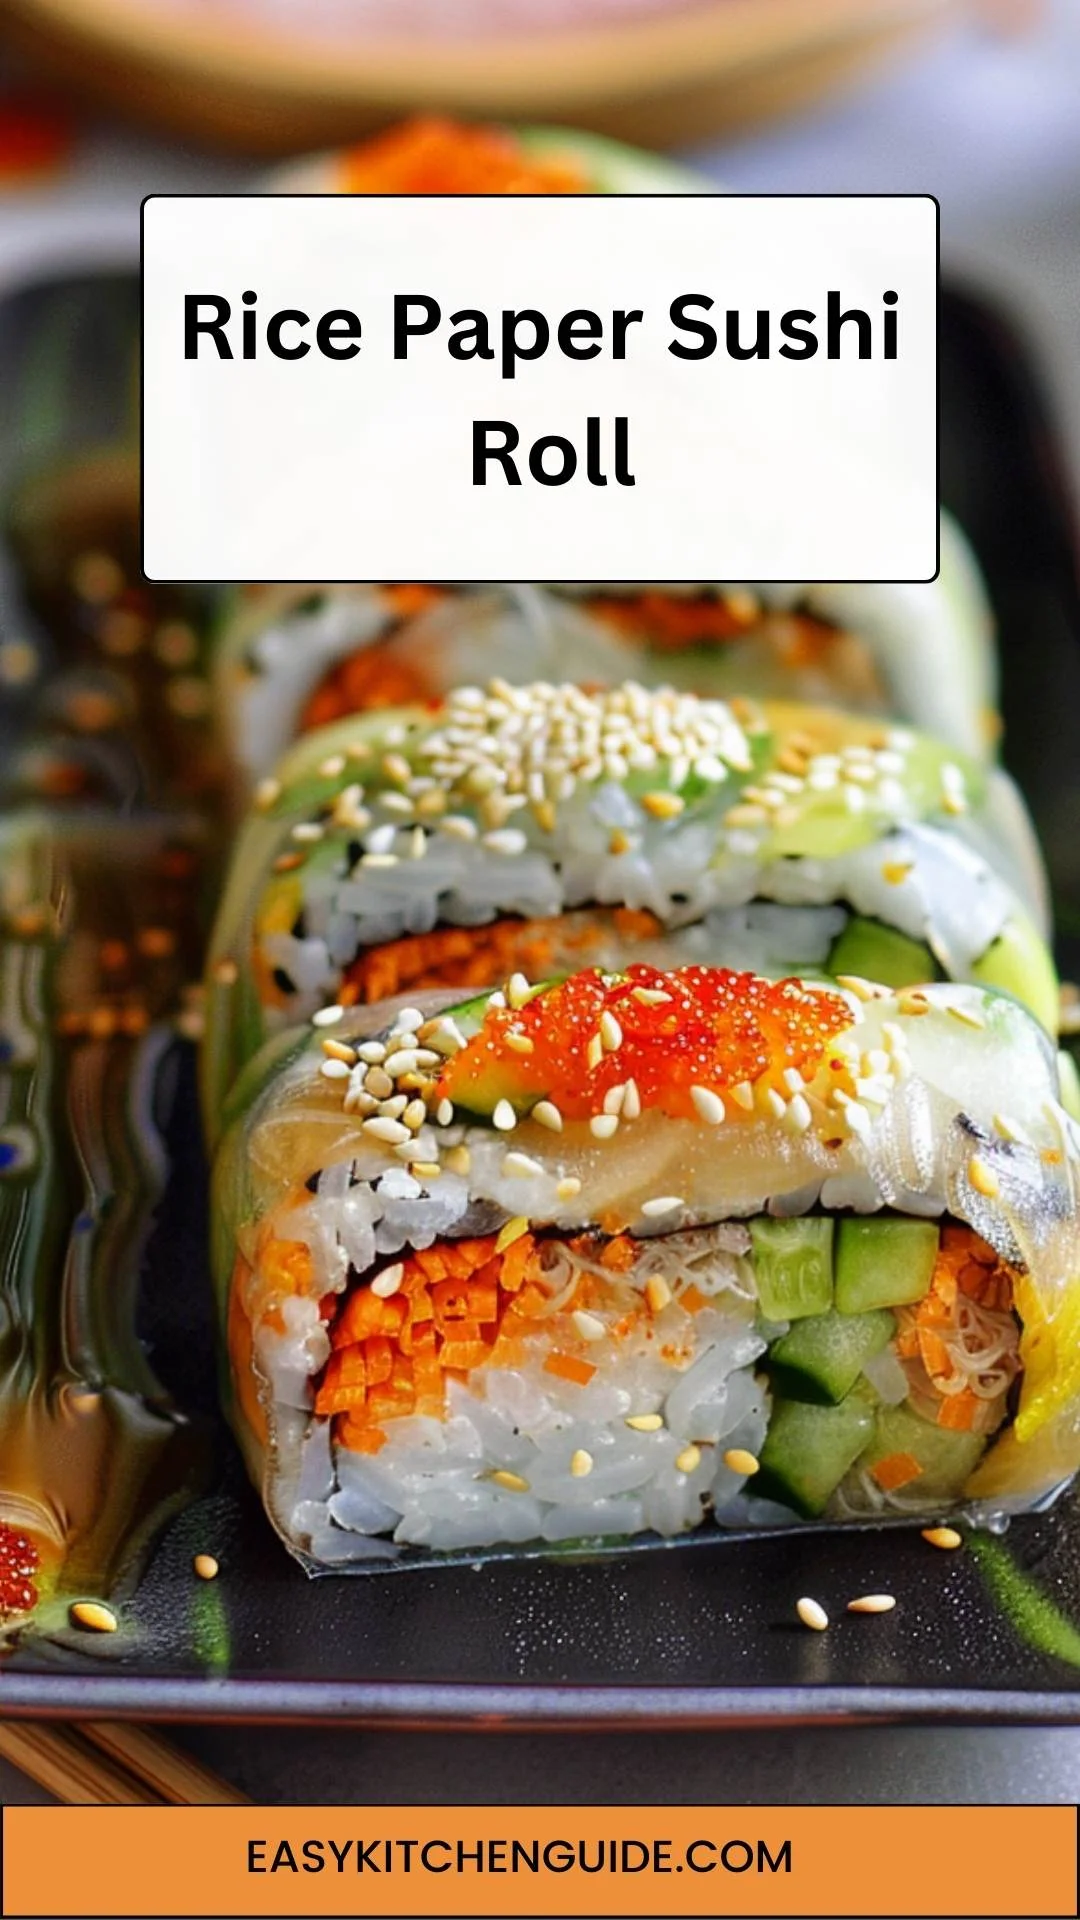 Rice Paper Sushi Roll